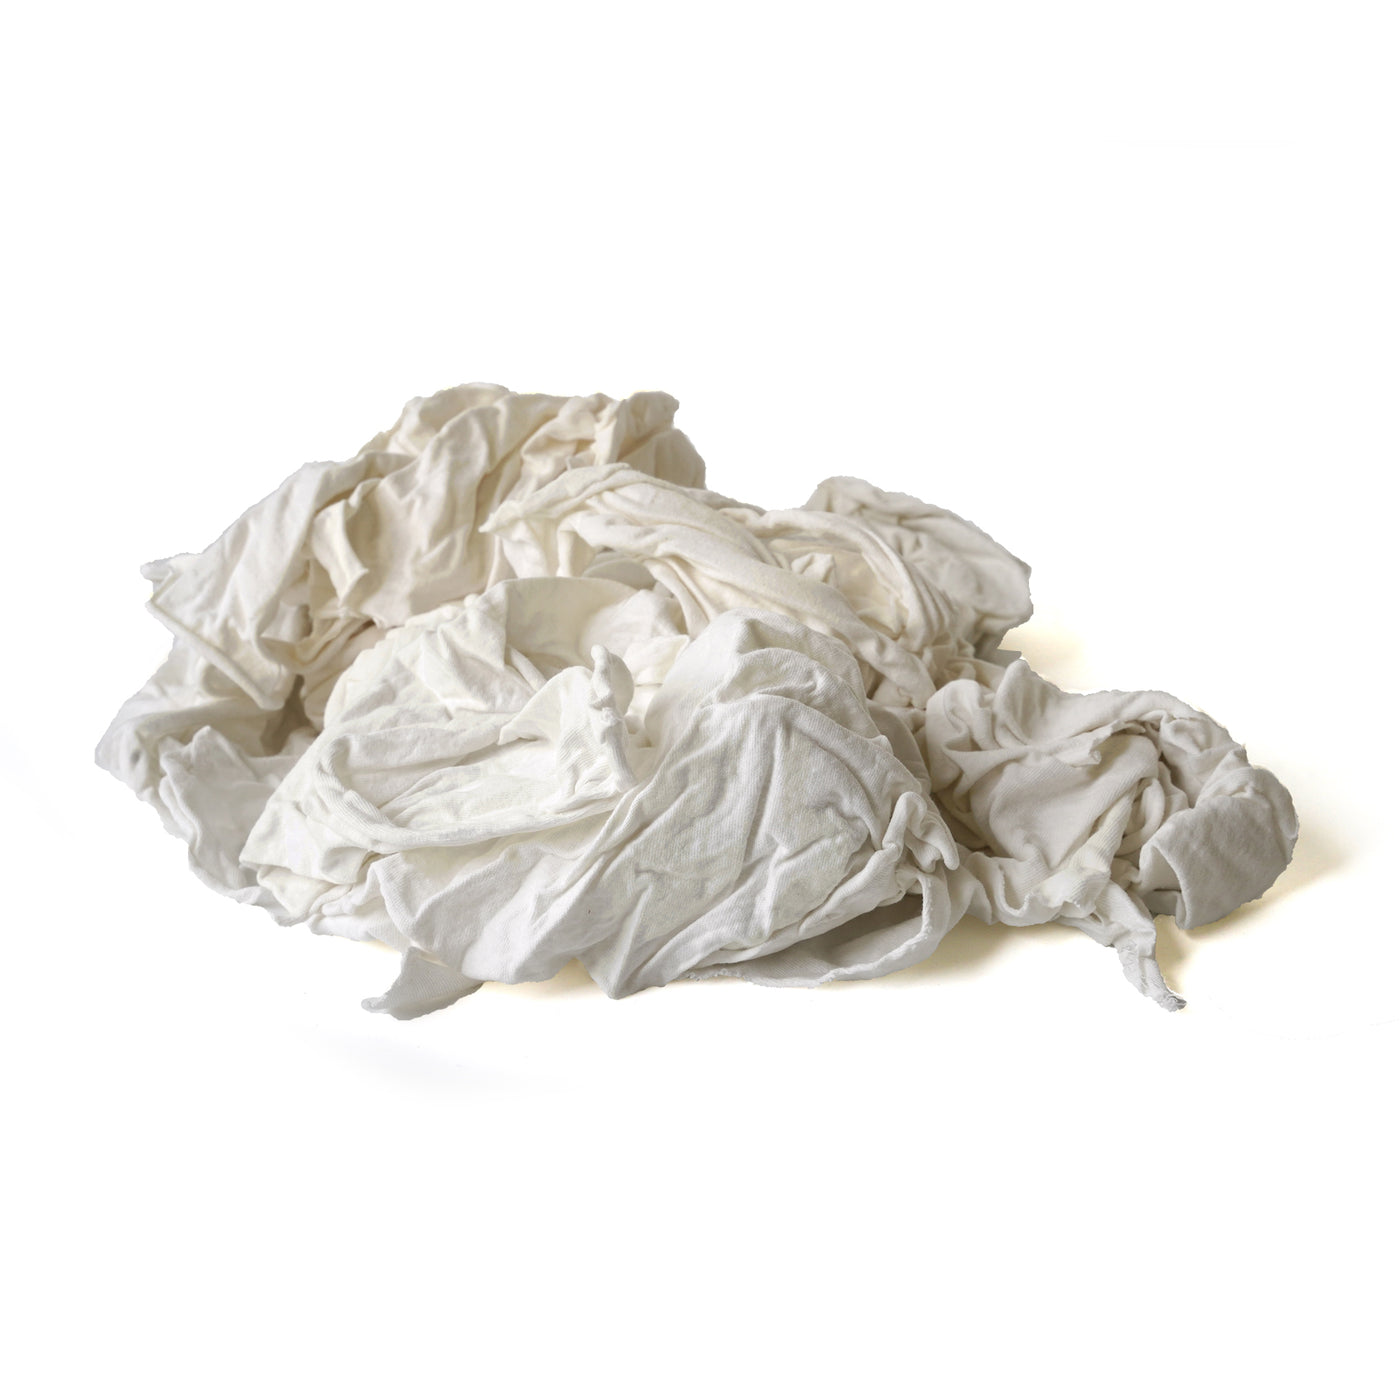 Buffalo Industries (10524) Absorbent White Recycled T-Shirt Cloth Rags - 25  lb. box - For All-purpose Wiping, Cleaning, and Polishing - Made from 100%